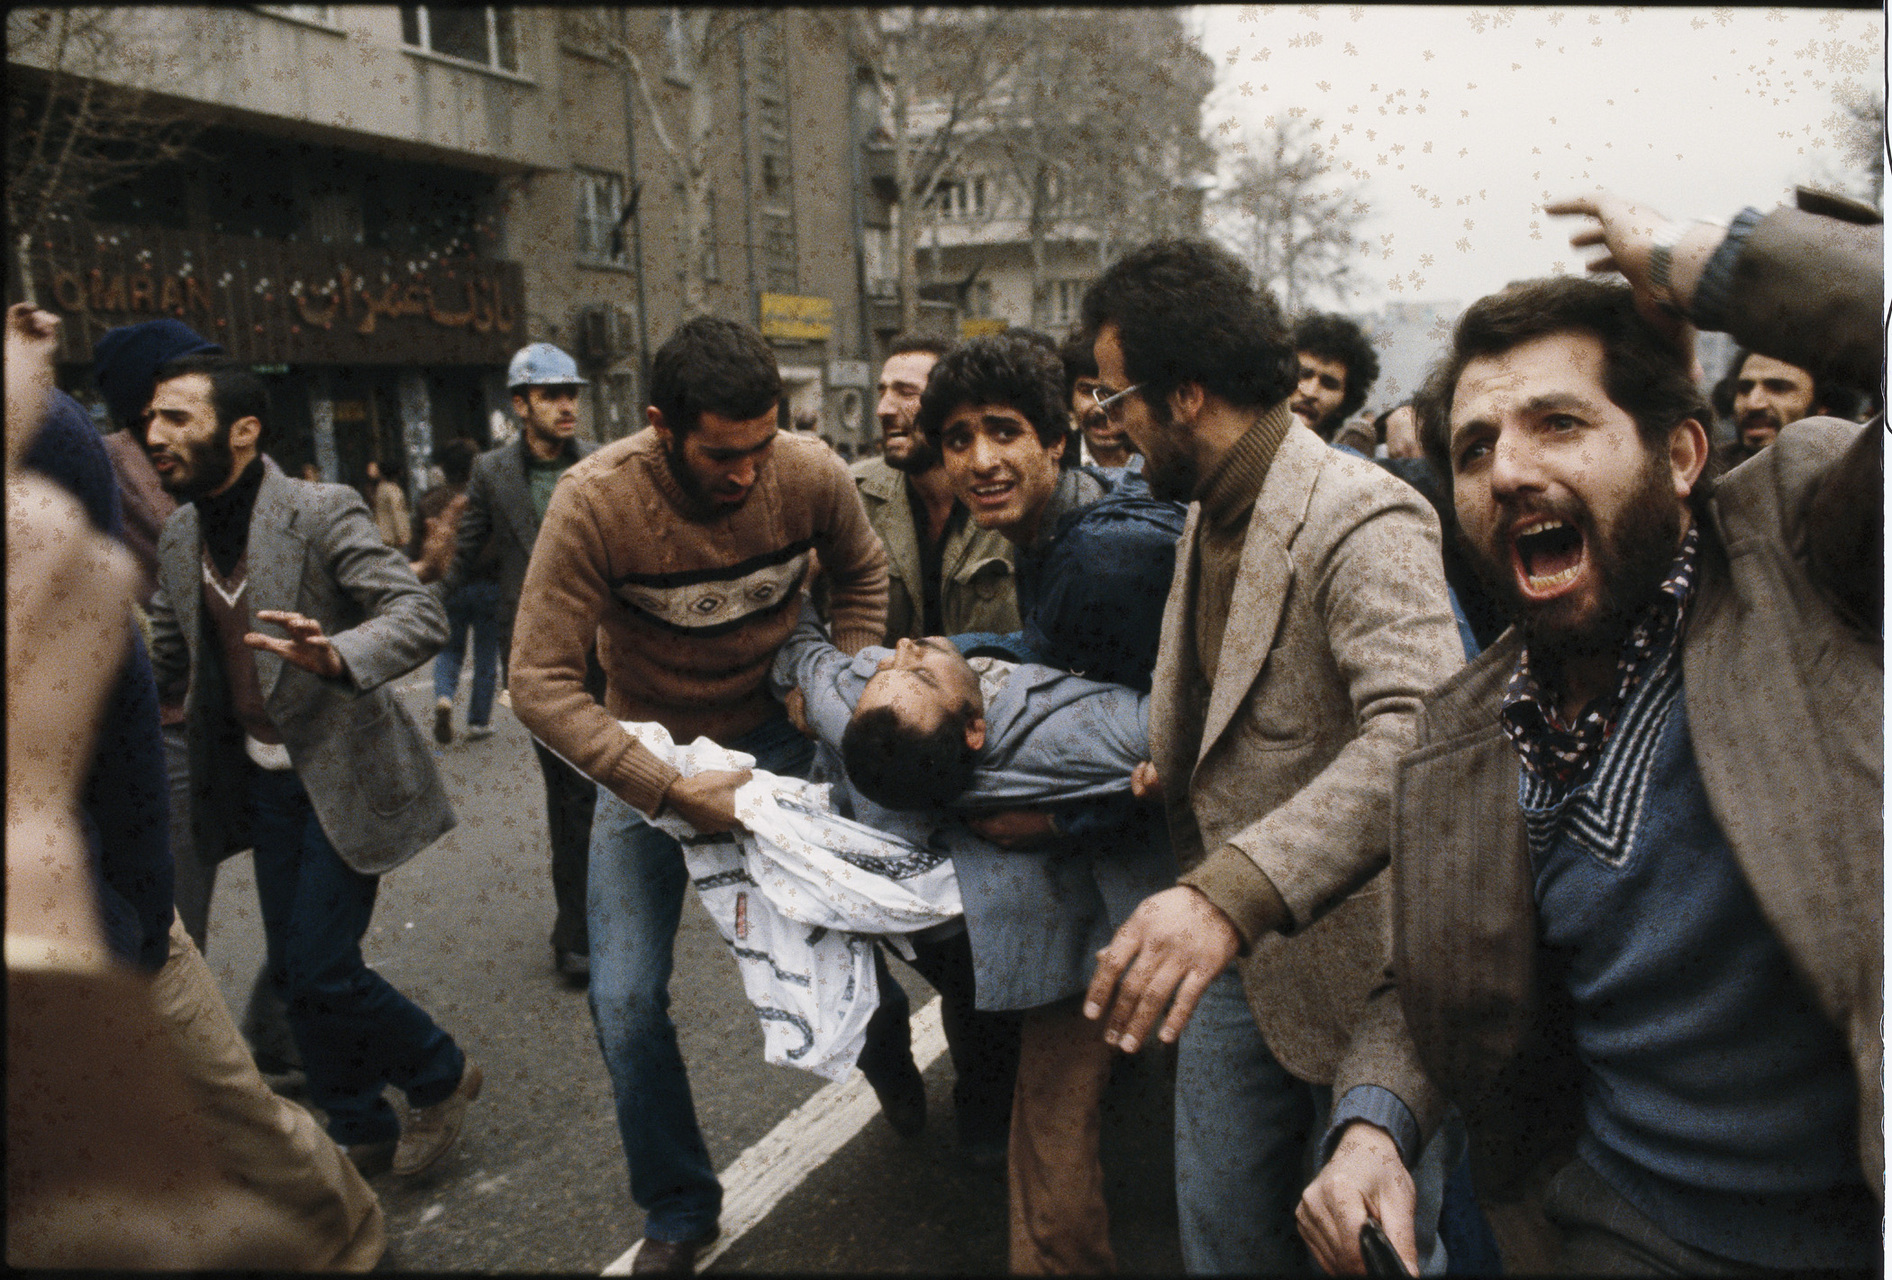 Wounded demonstrators are carried to an ambulance. : 44 Days: the Iranian Revolution : David Burnett | Photographer